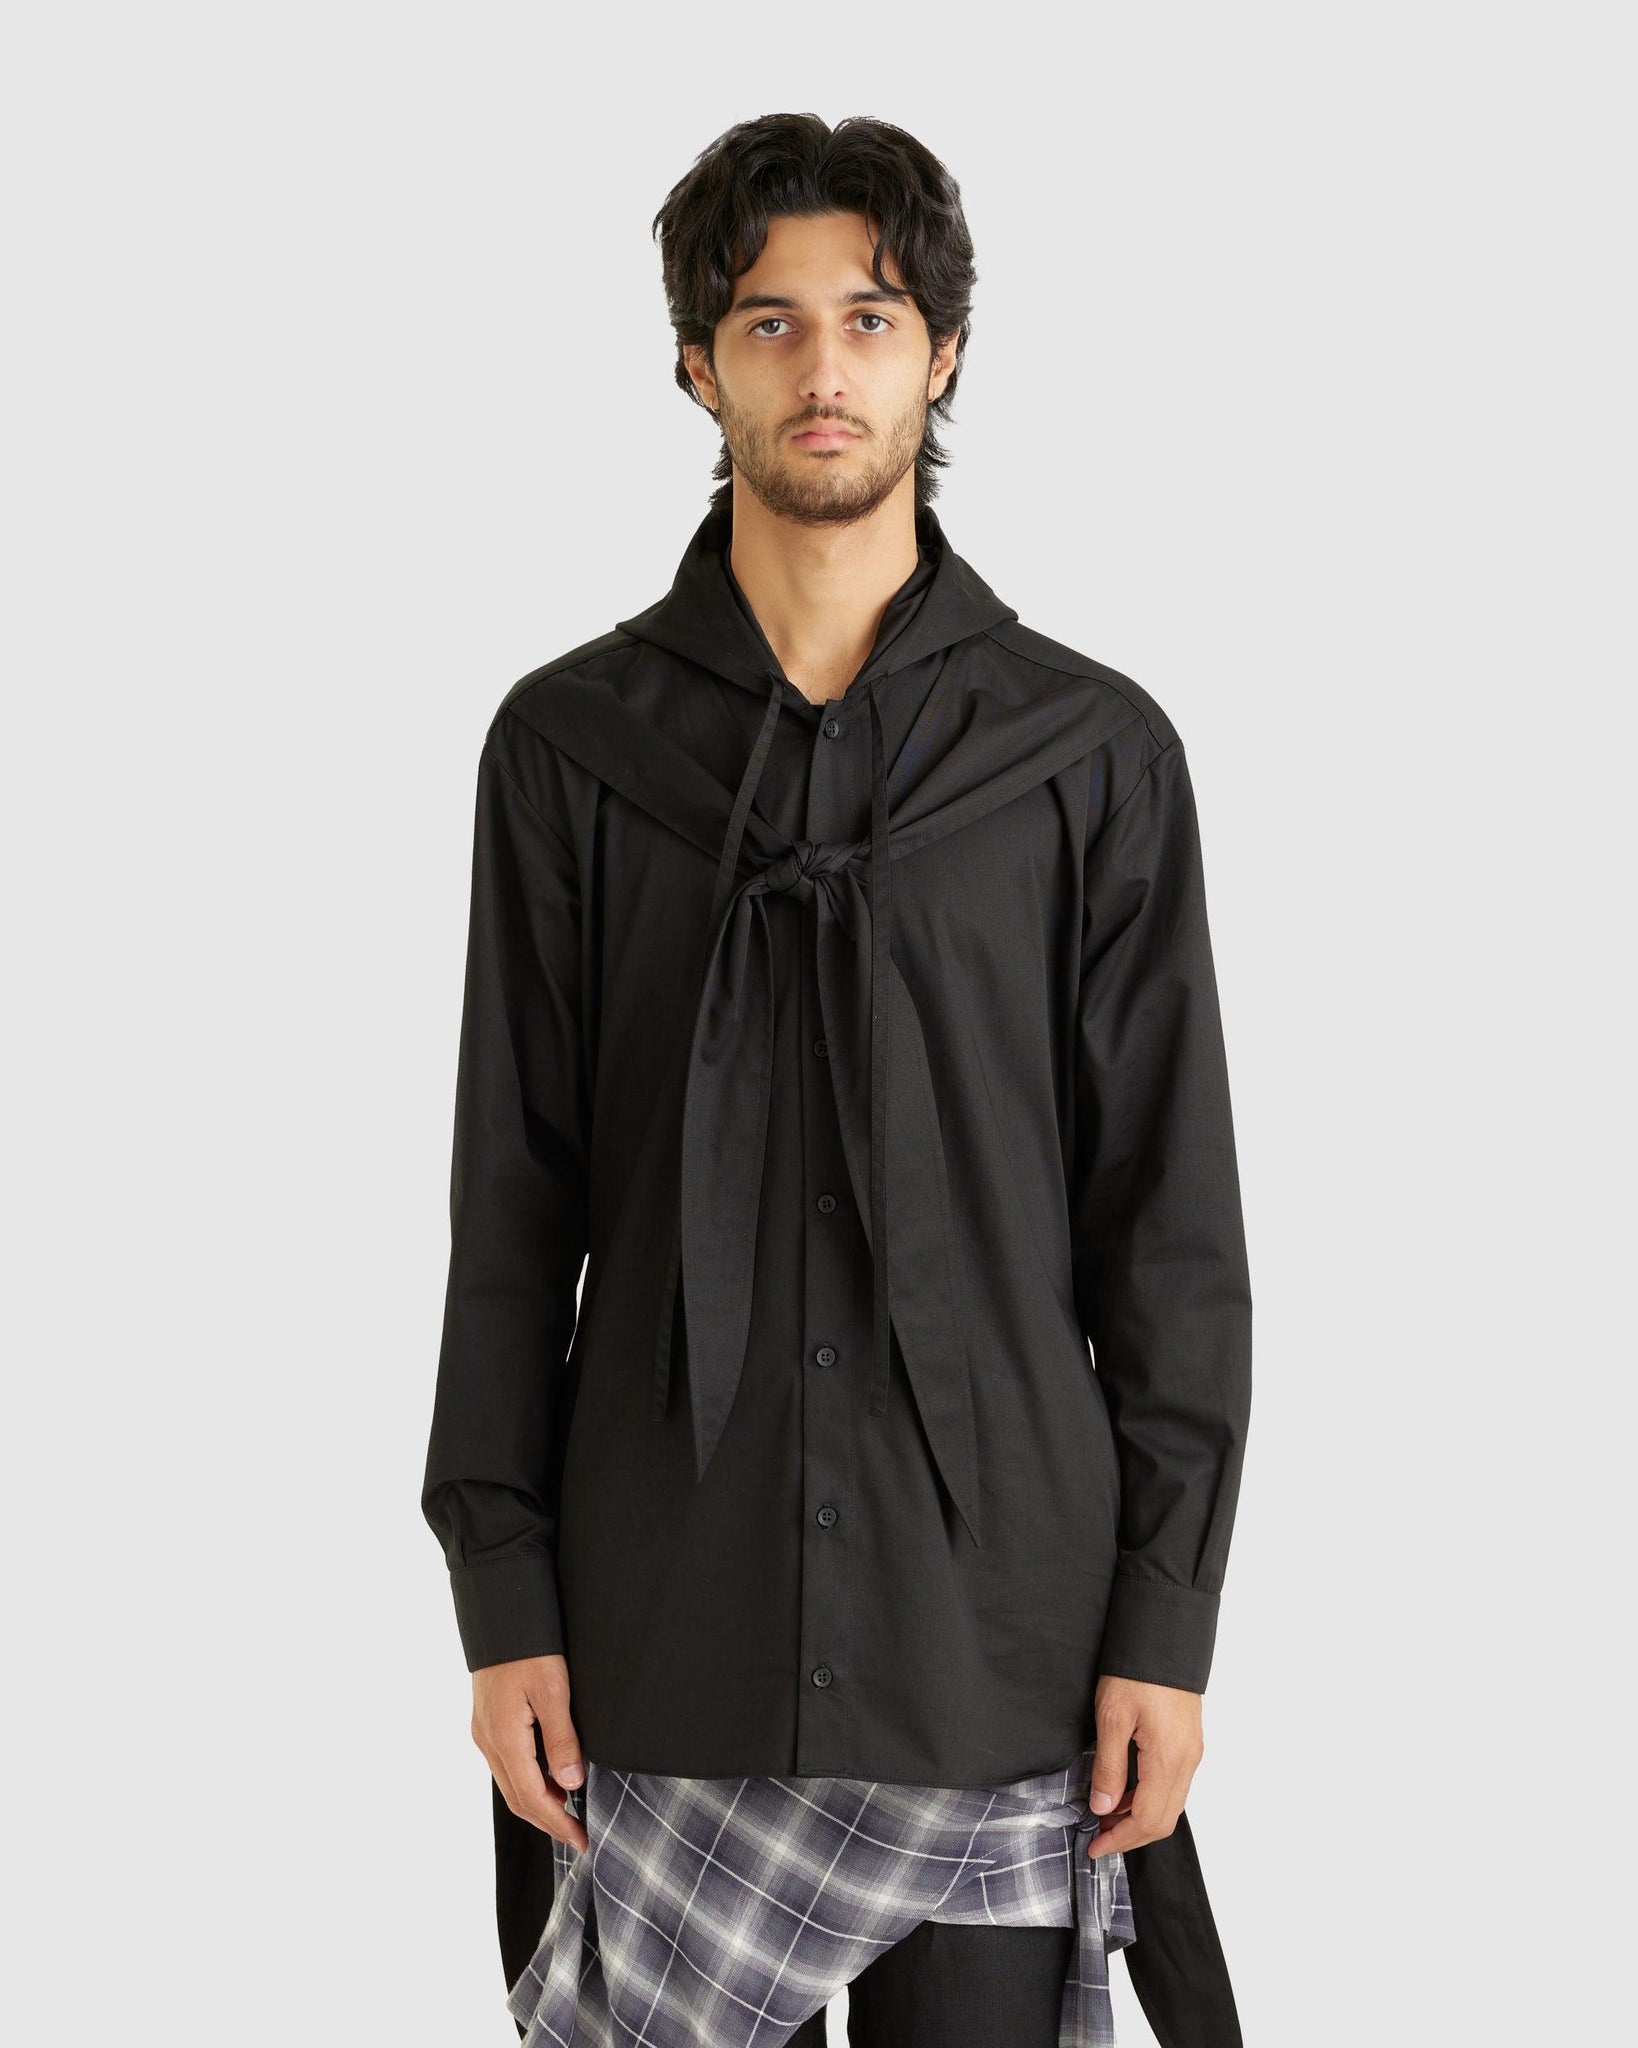 Crossed Hooded Shirt - {{ collection.title }} - Chinatown Country Club 